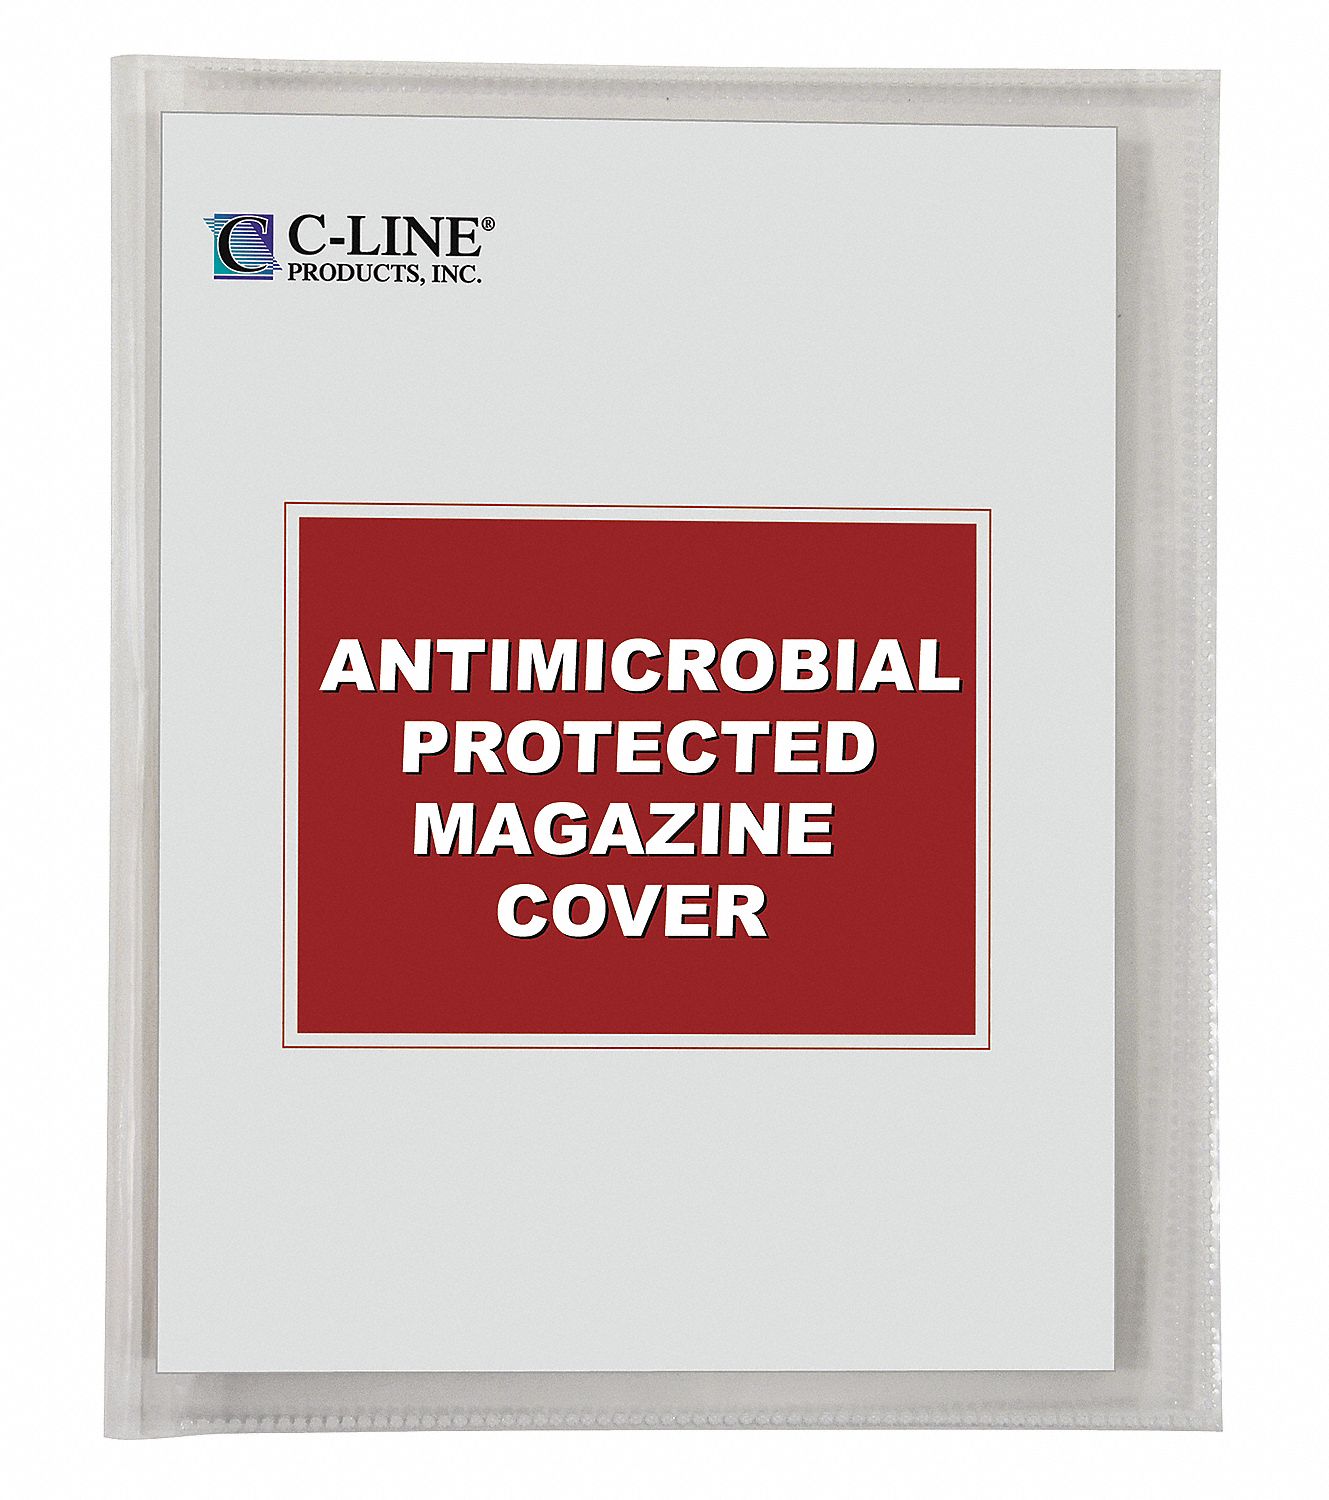 4YNU2 - Magazine Cover Antimicrobial PK25